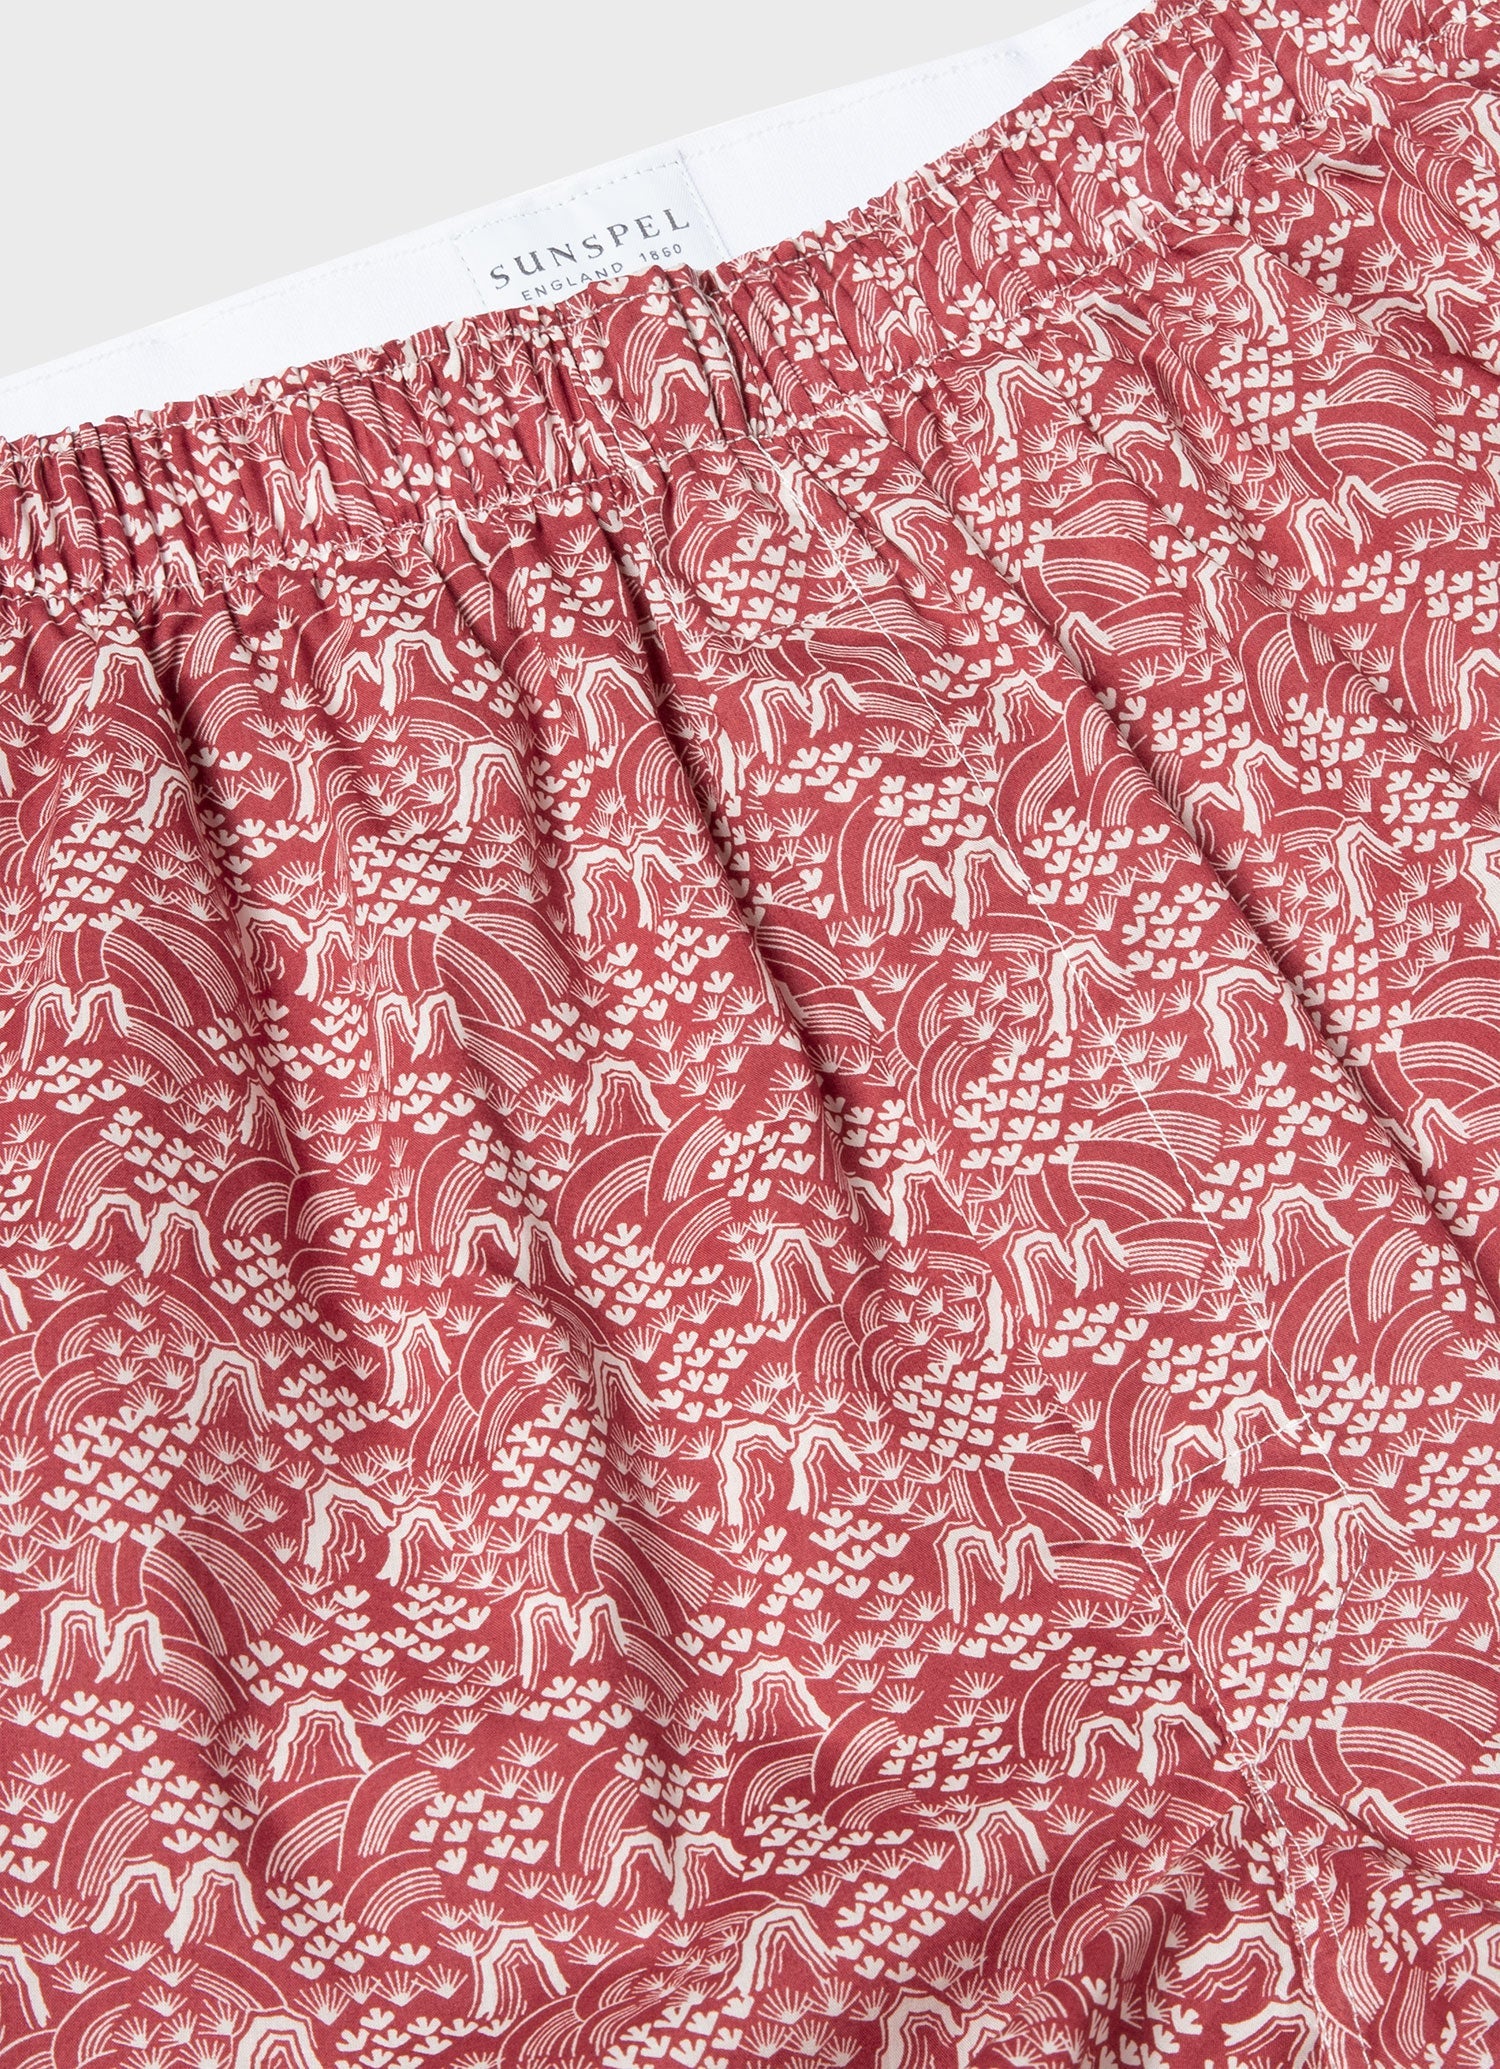 Men's Liberty Print Boxer Shorts in Japanese Floral